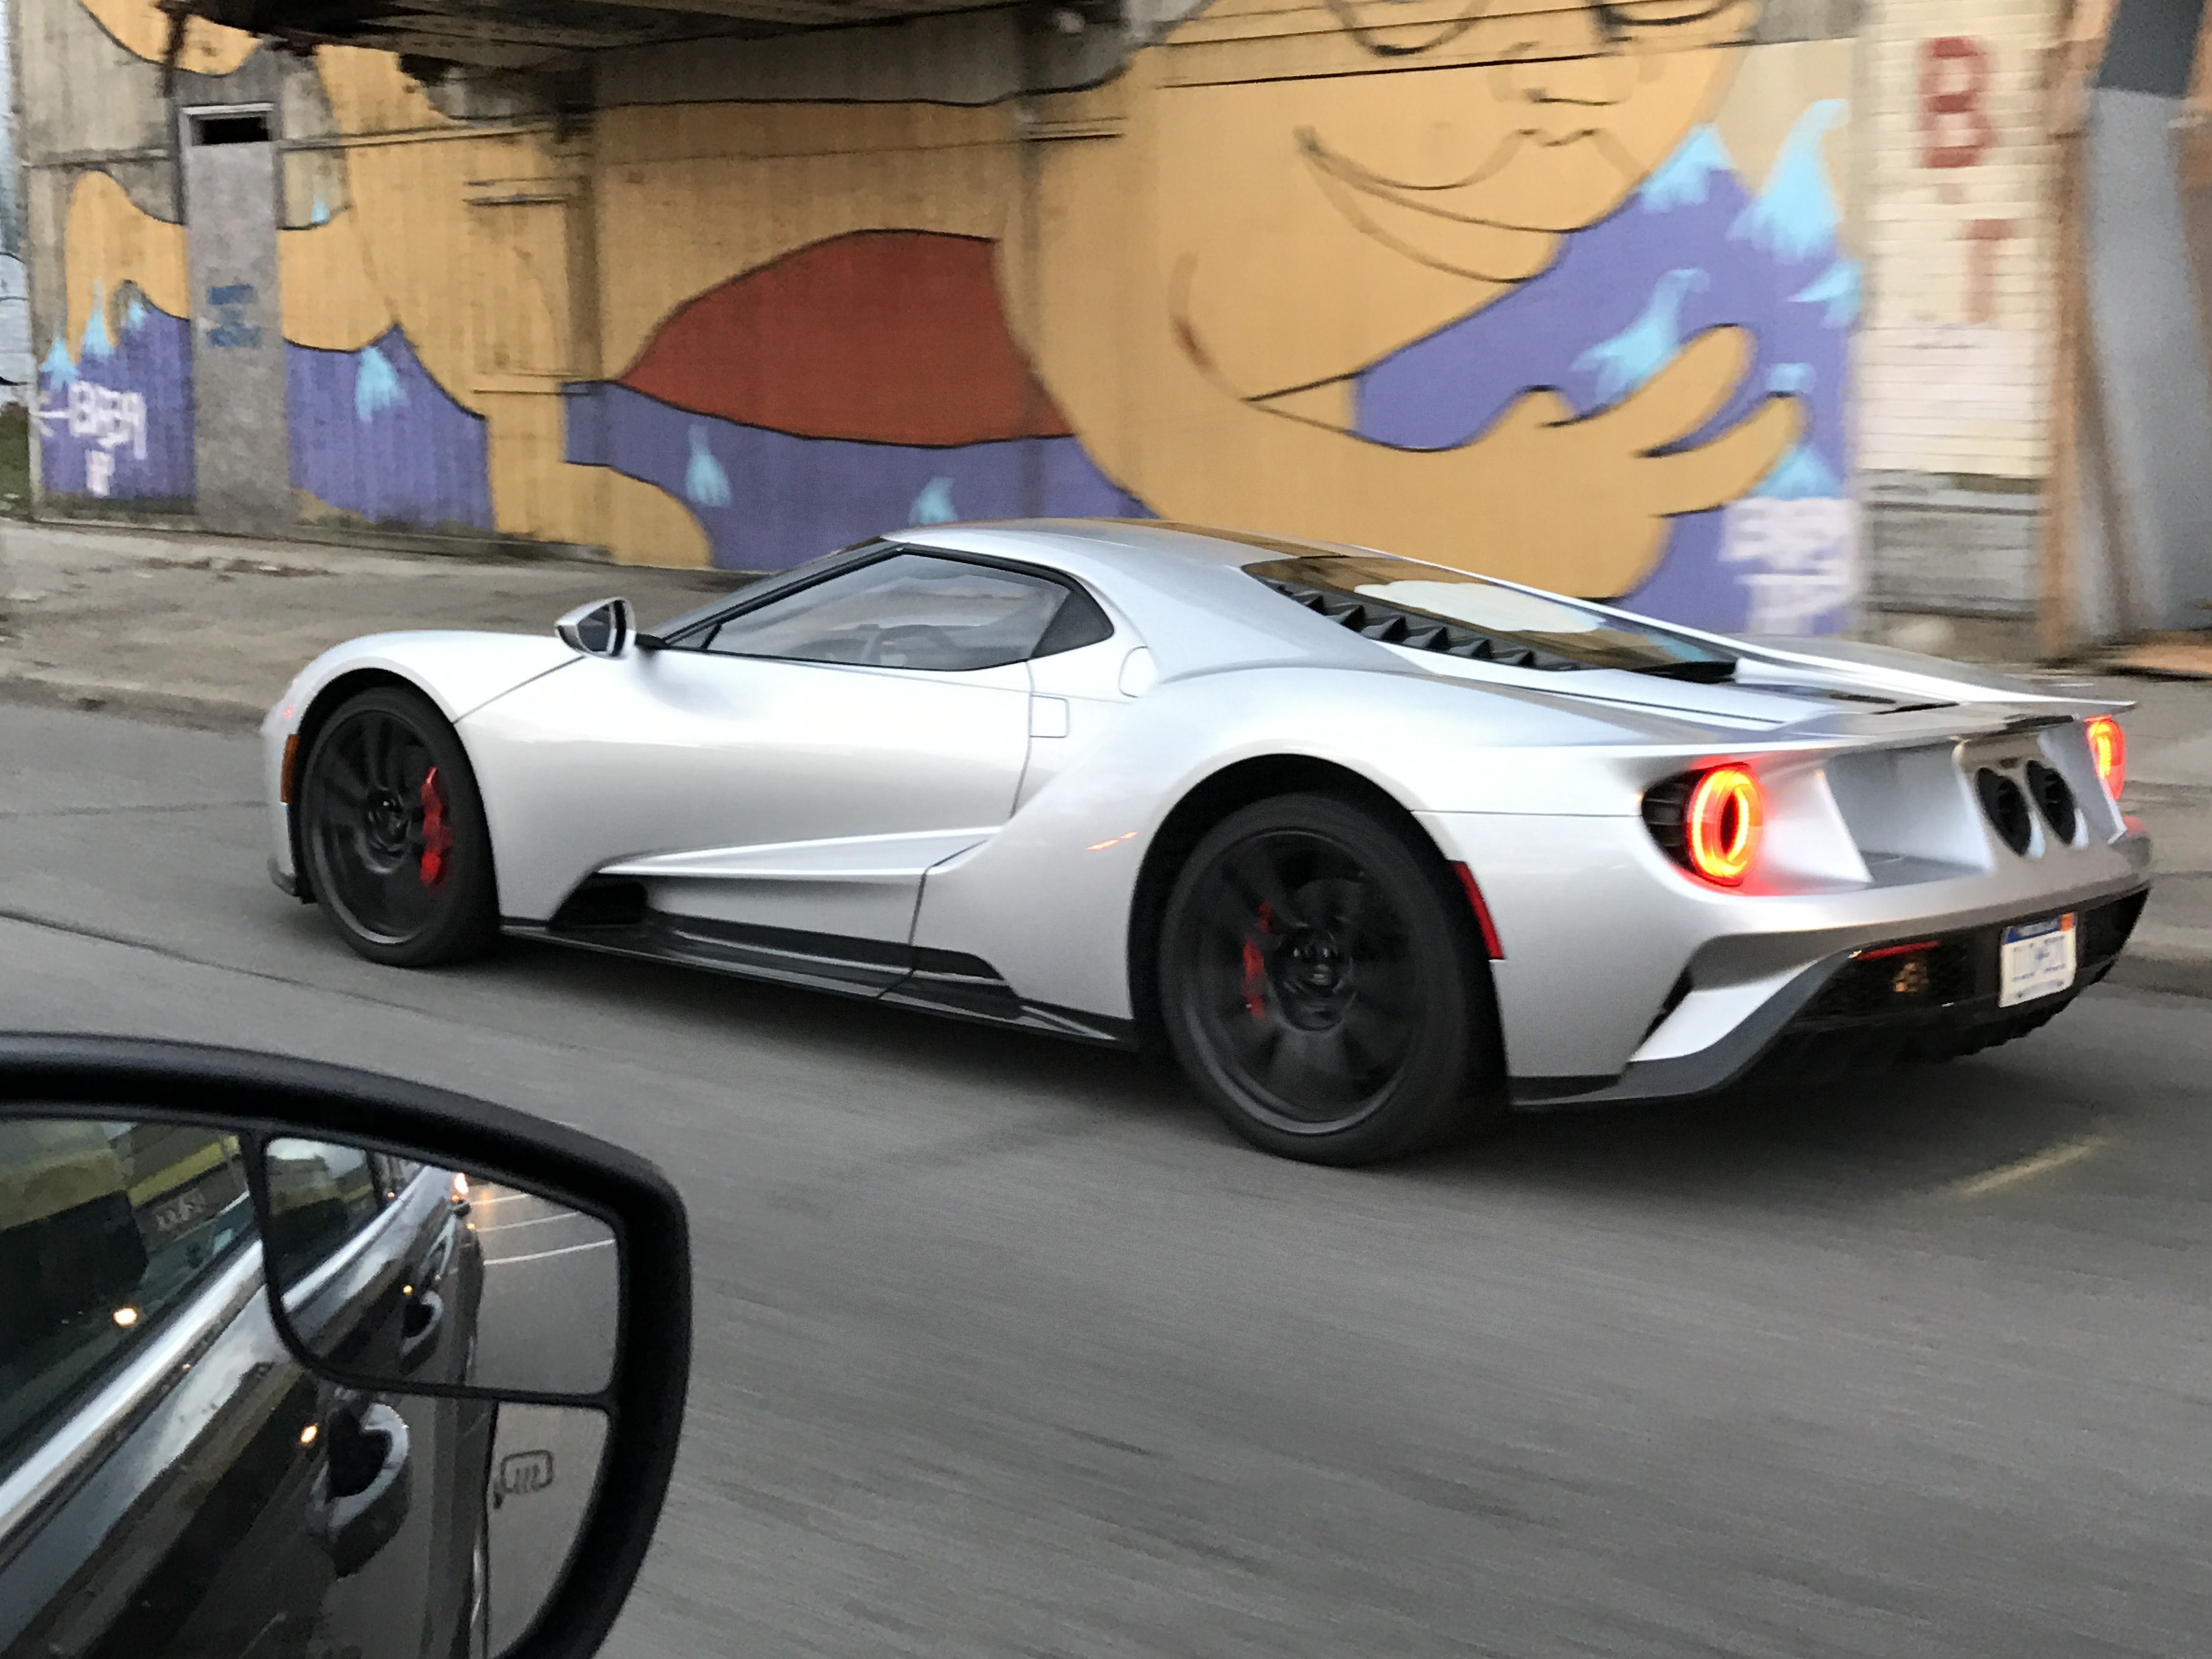 fully-naked-2017-ford-gt-roams-the-streets-of-detroit-sounds-like-a-hypercar-114348_1.jpg